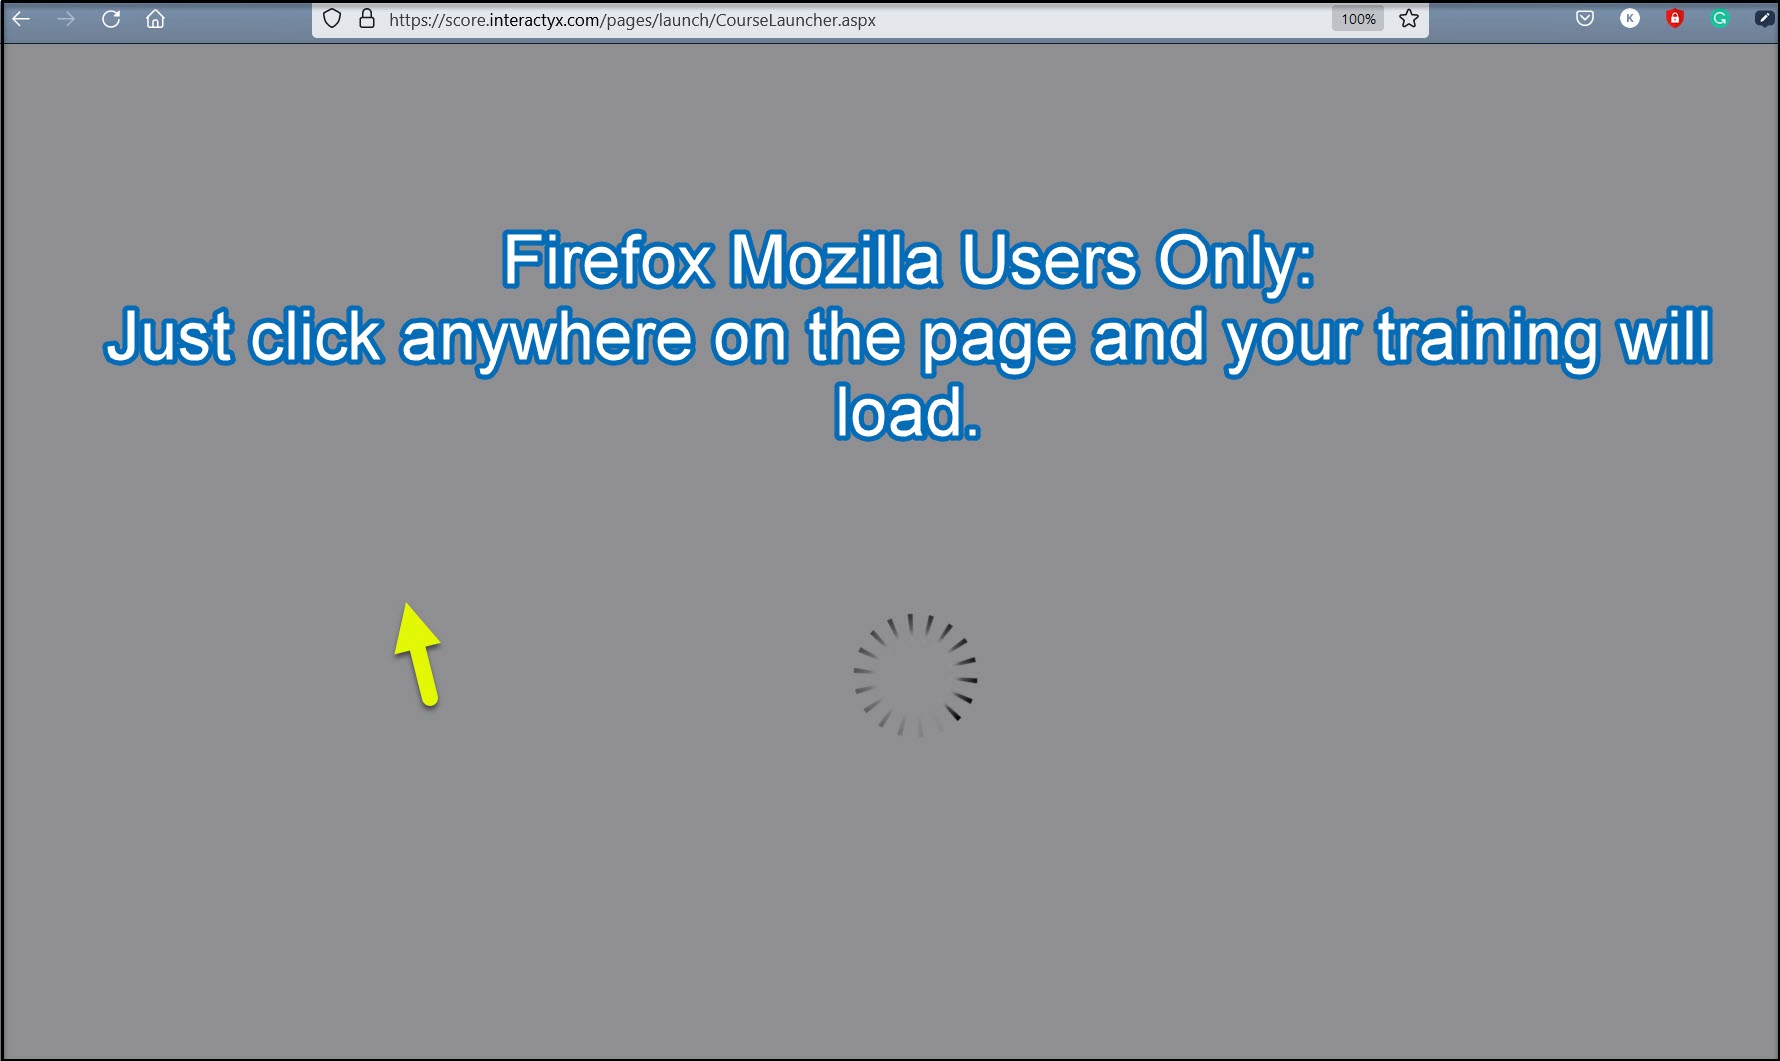 mozilla_users_only.jpg